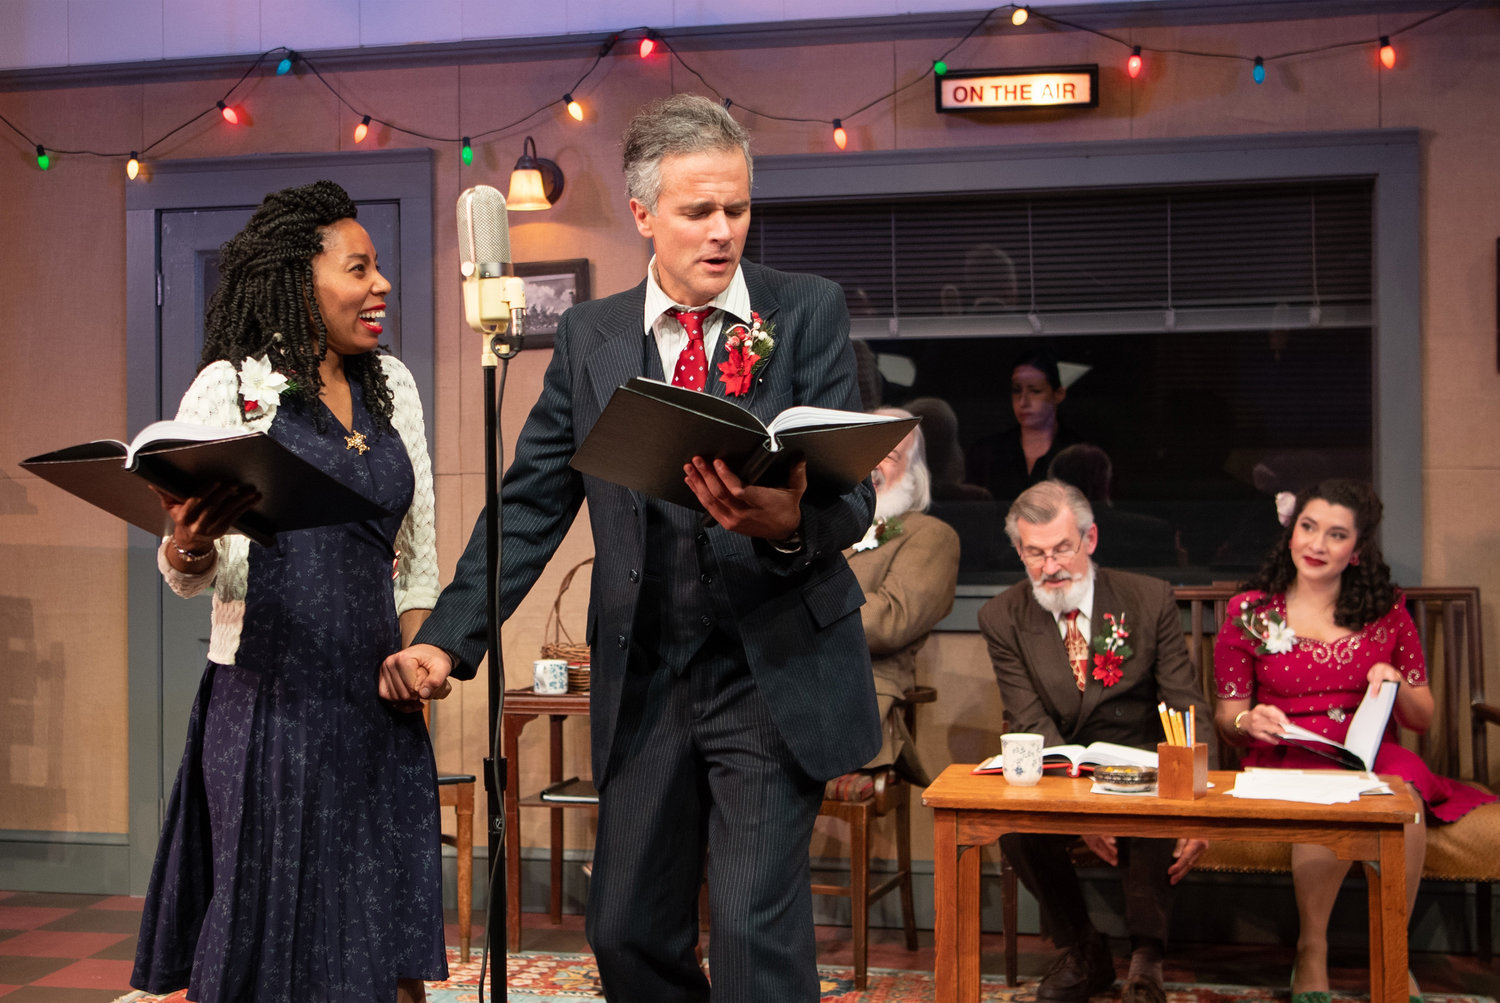 Artistic director Tony Estrella in The Gamm’s 2021 production of It’s A Wonderful Life: A Live Radio Play, which returns for the holidays for their 2022/23 season